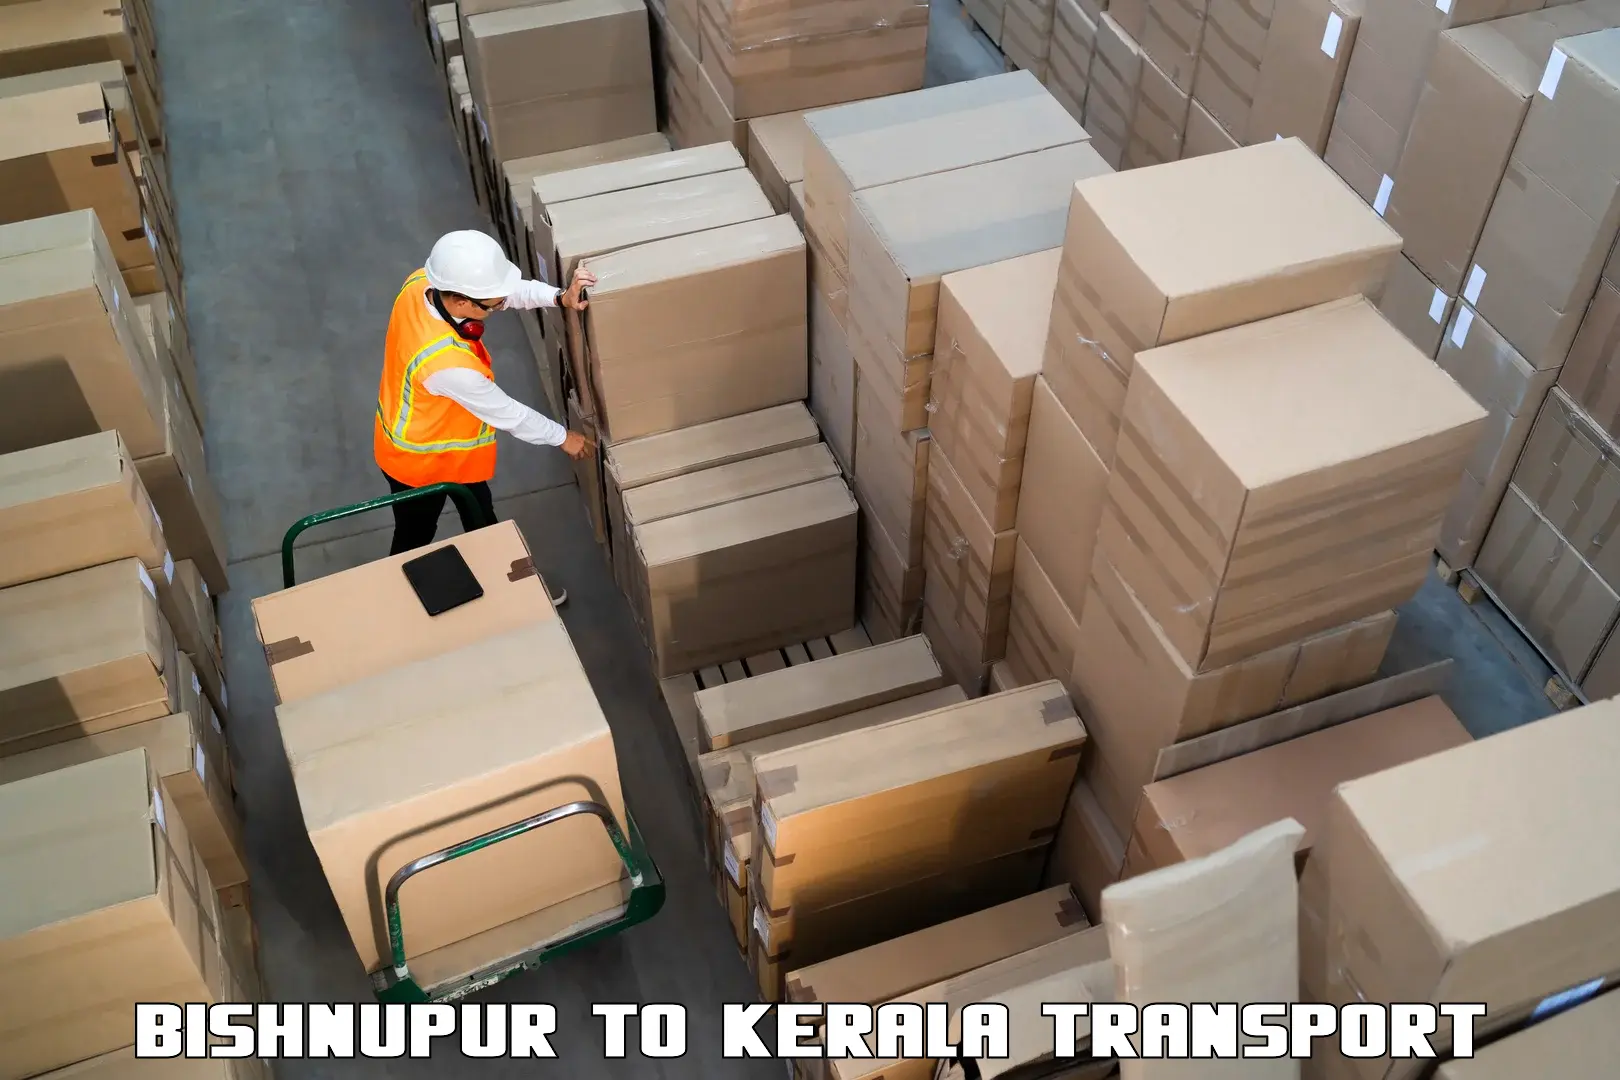 Delivery service Bishnupur to Thalassery